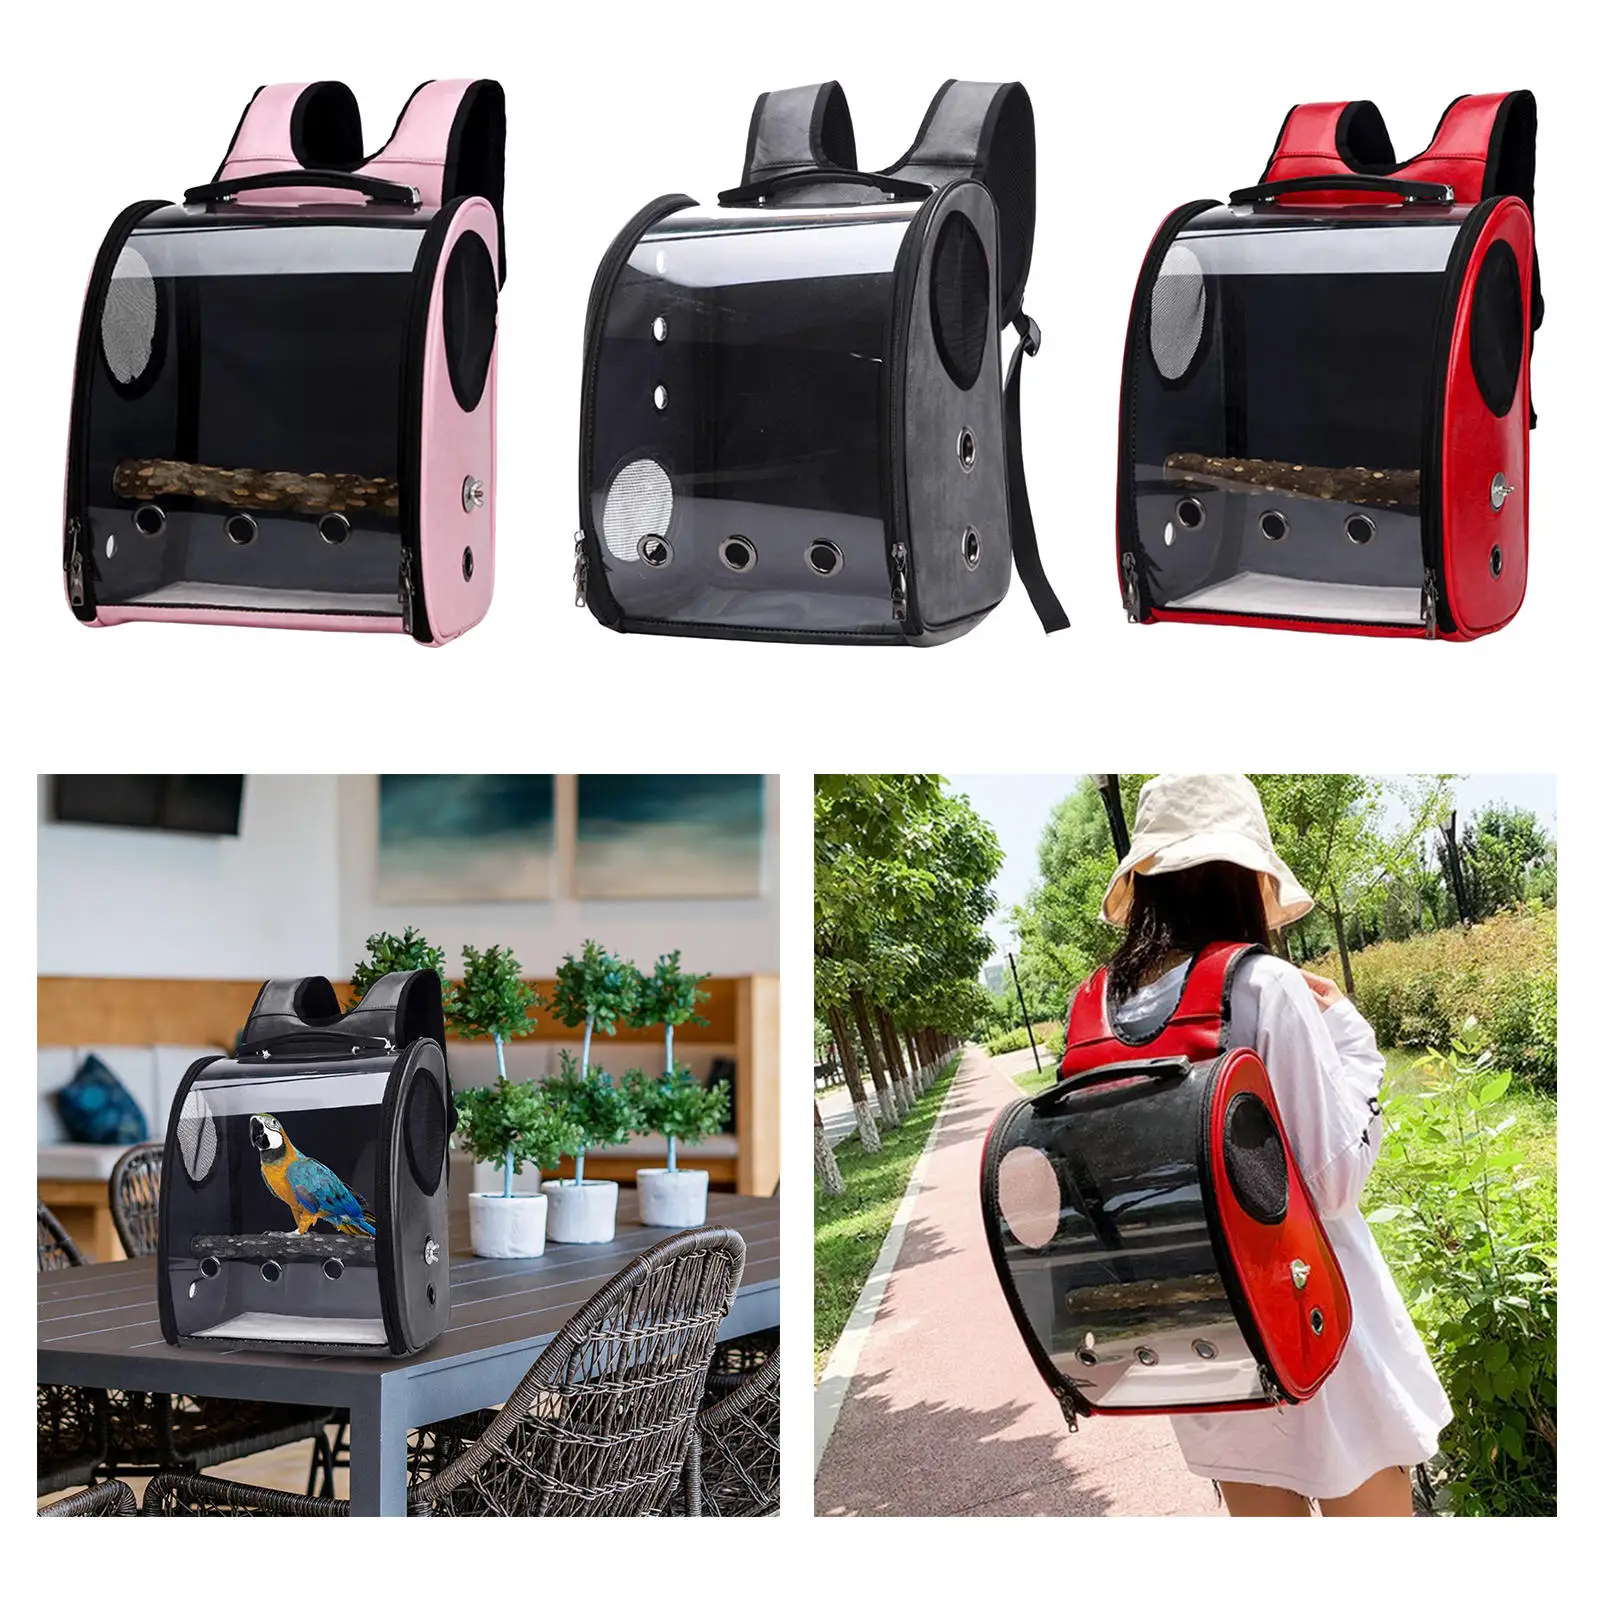 Bird Parrot Pet Carrier Cage Travel Bag Transport Breathable Parrot Go Out Capsule Transparent Space Carry Panoramic Design